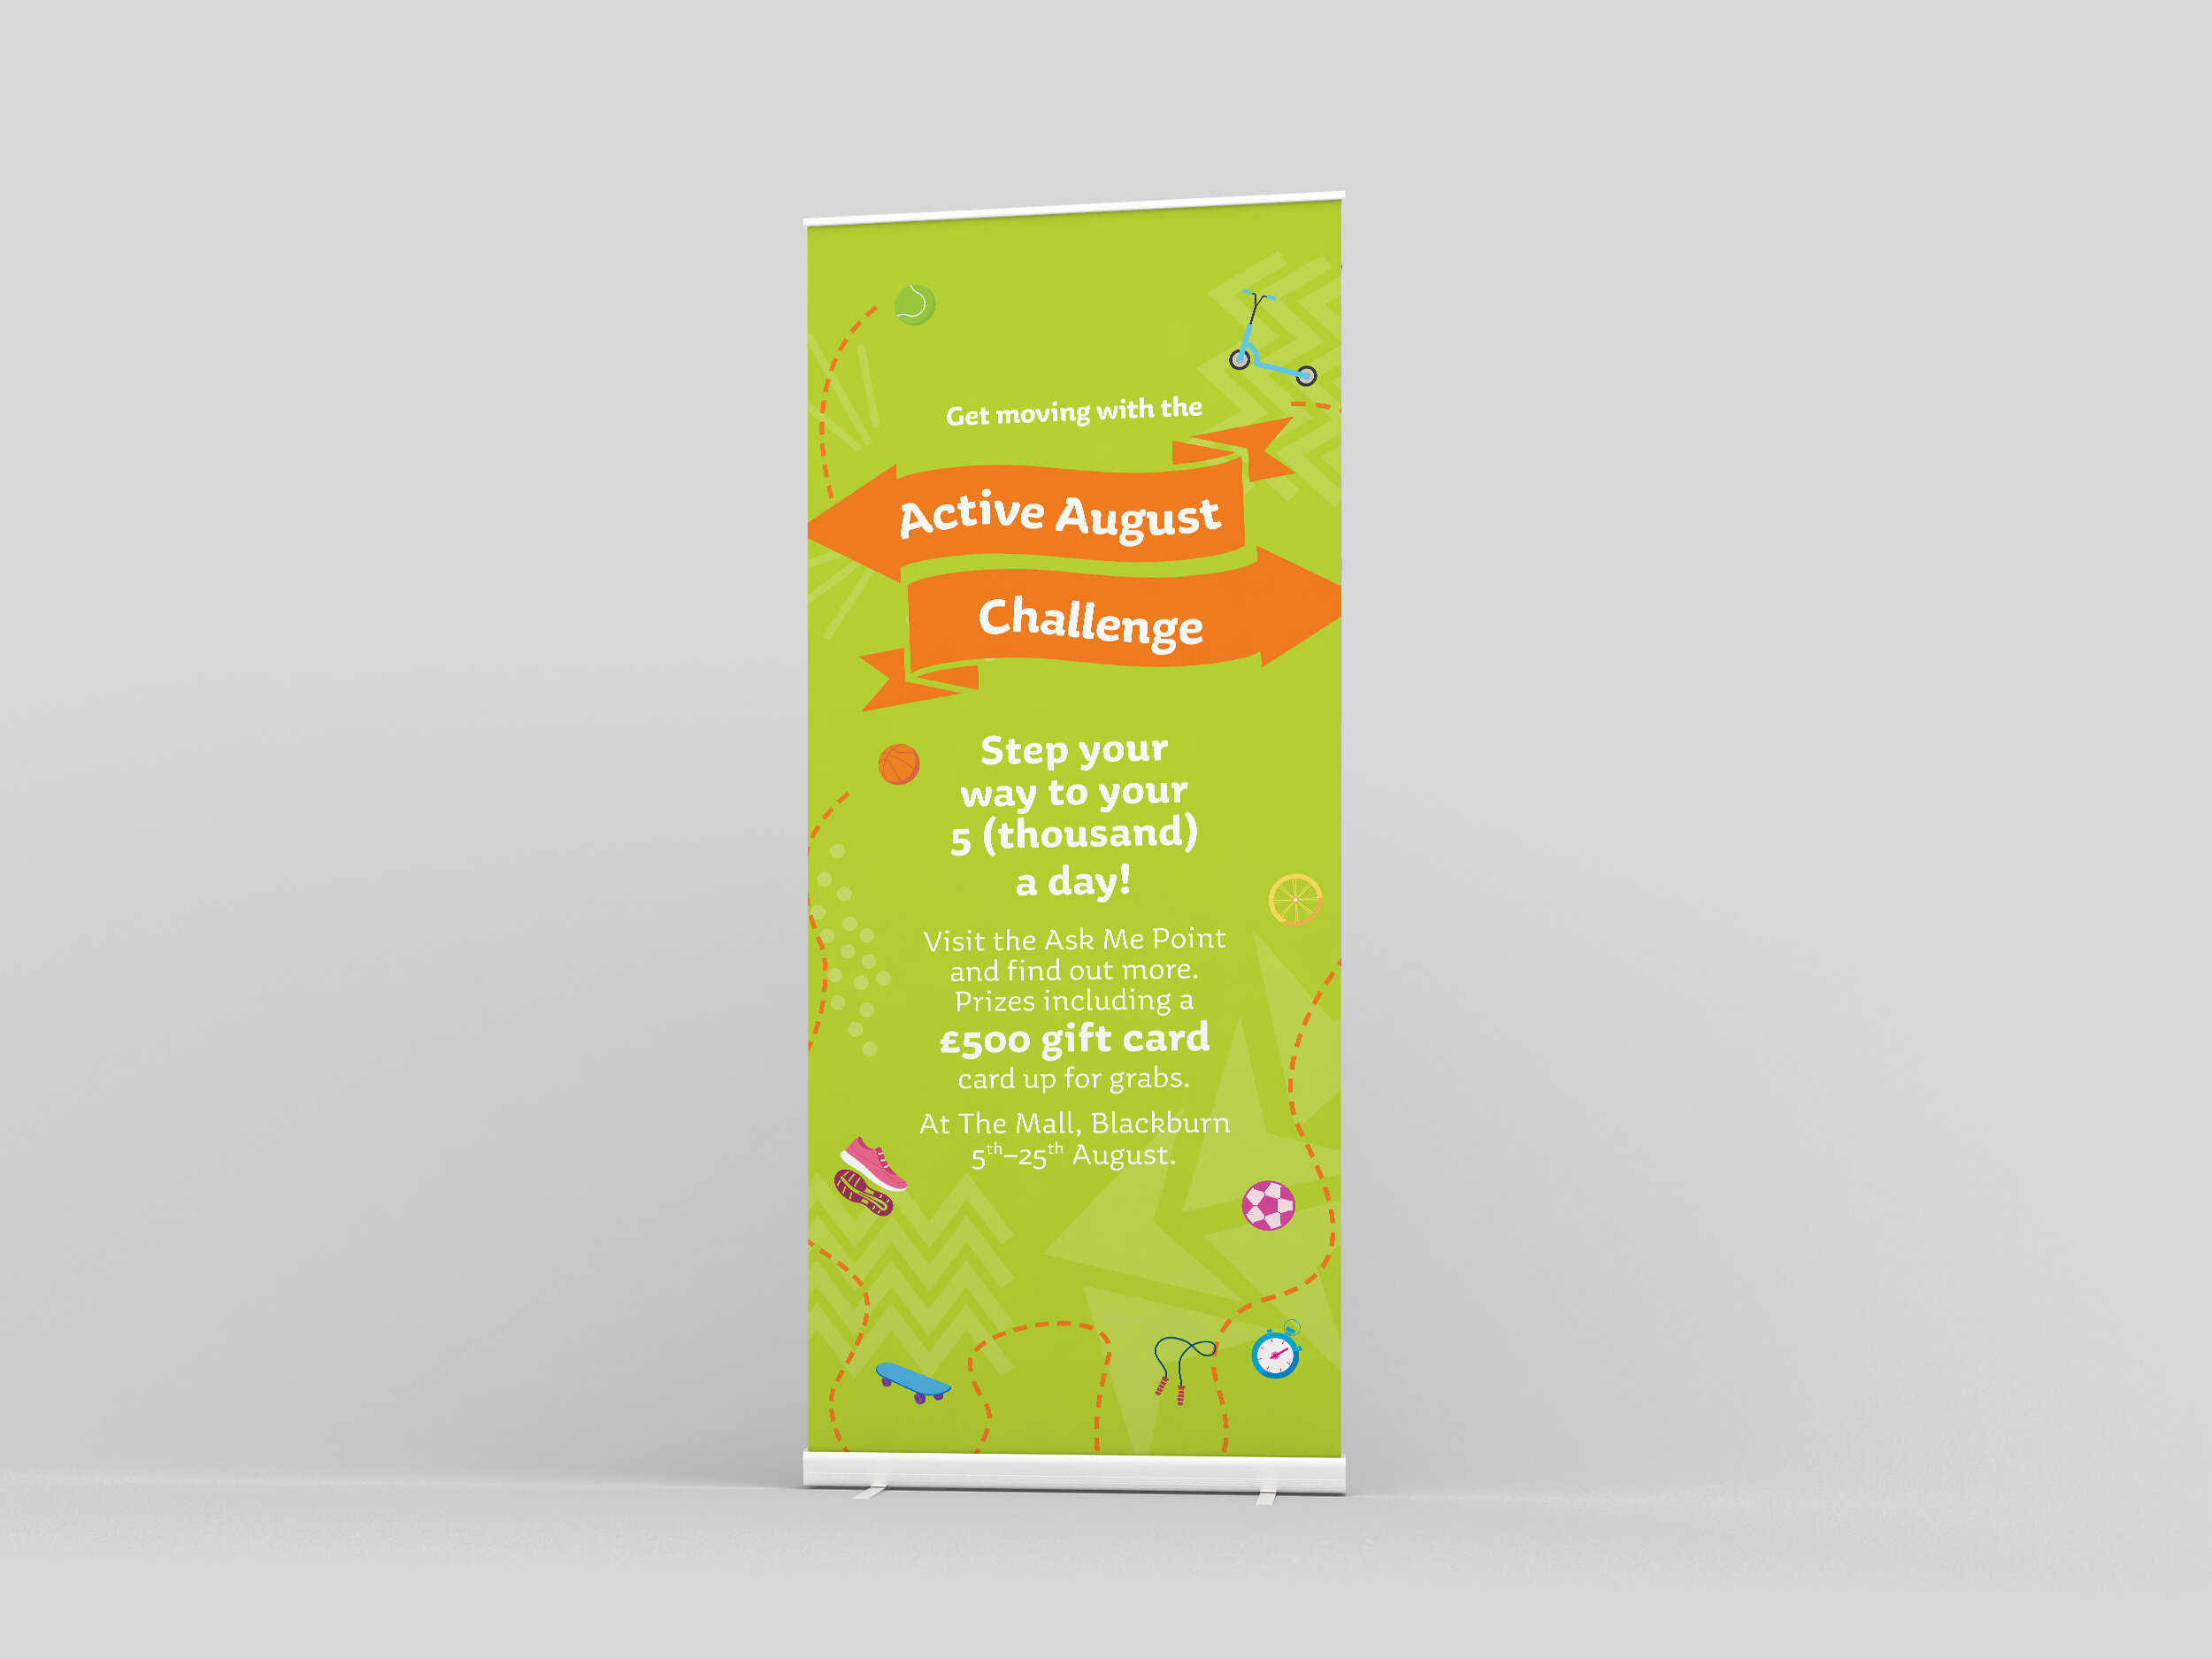 ActiveAugust_Rollup-Mockup.jpg